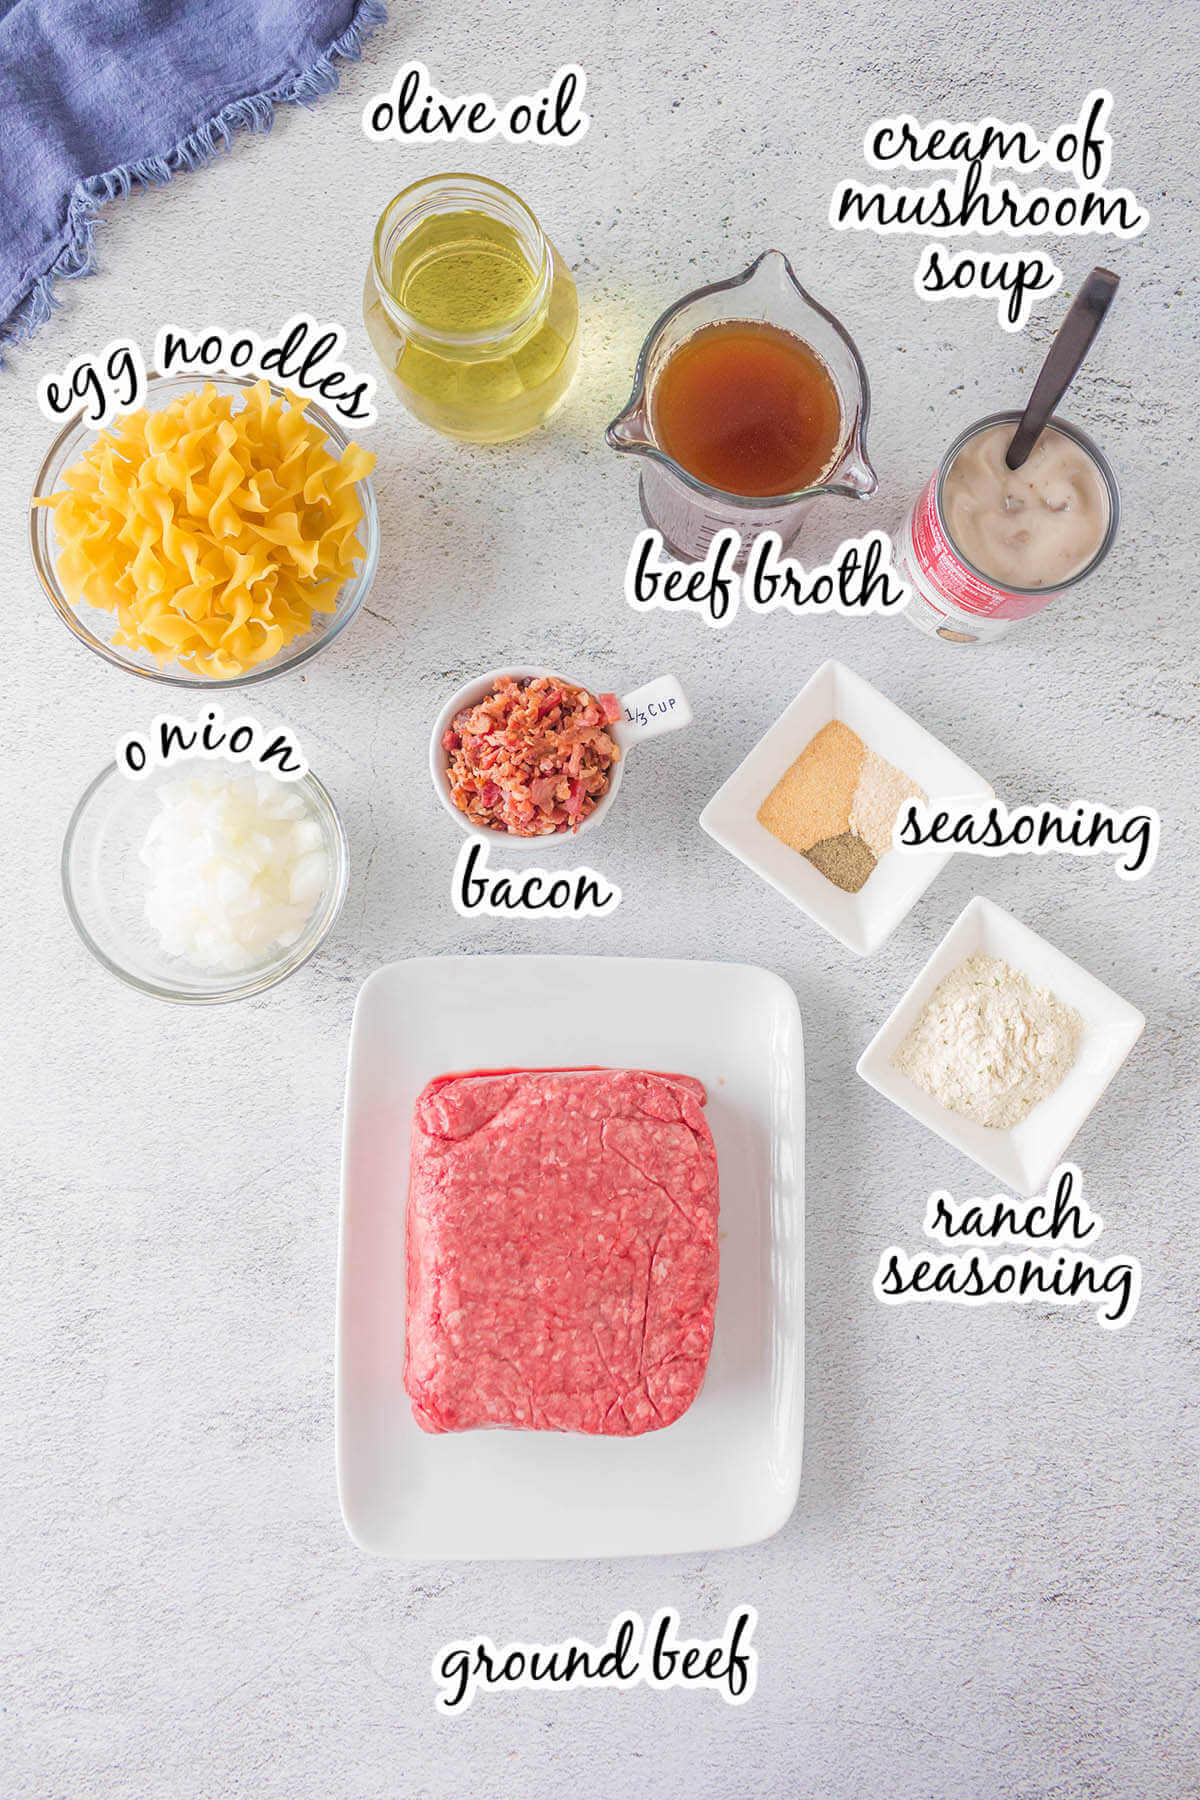 Ingredients to make pasta dish. With print overlay.